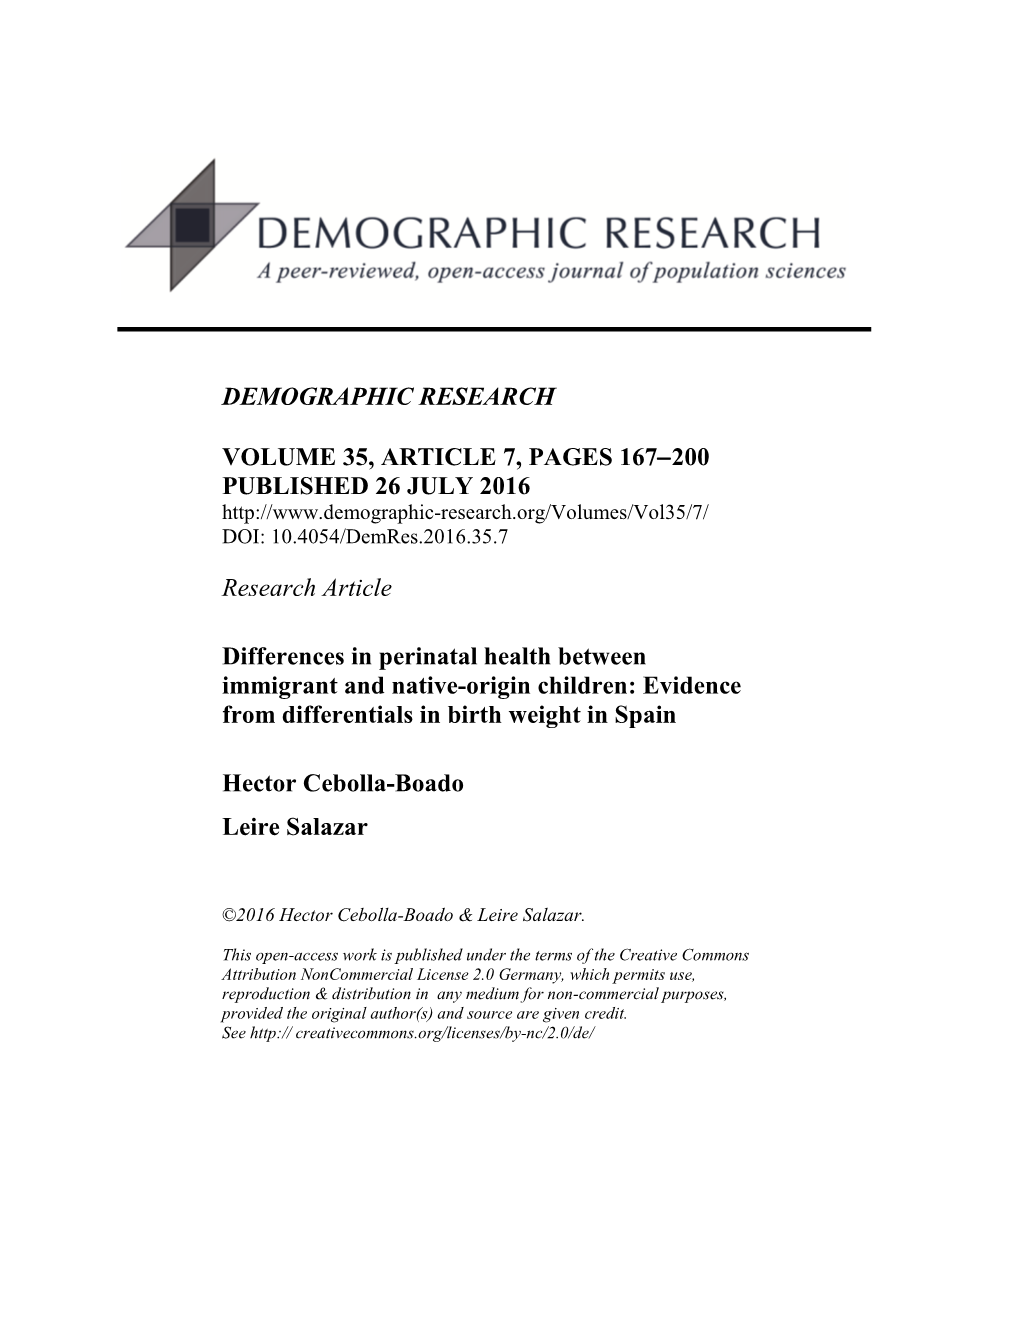 Evidence from Differentials in Birth Weight in Spain